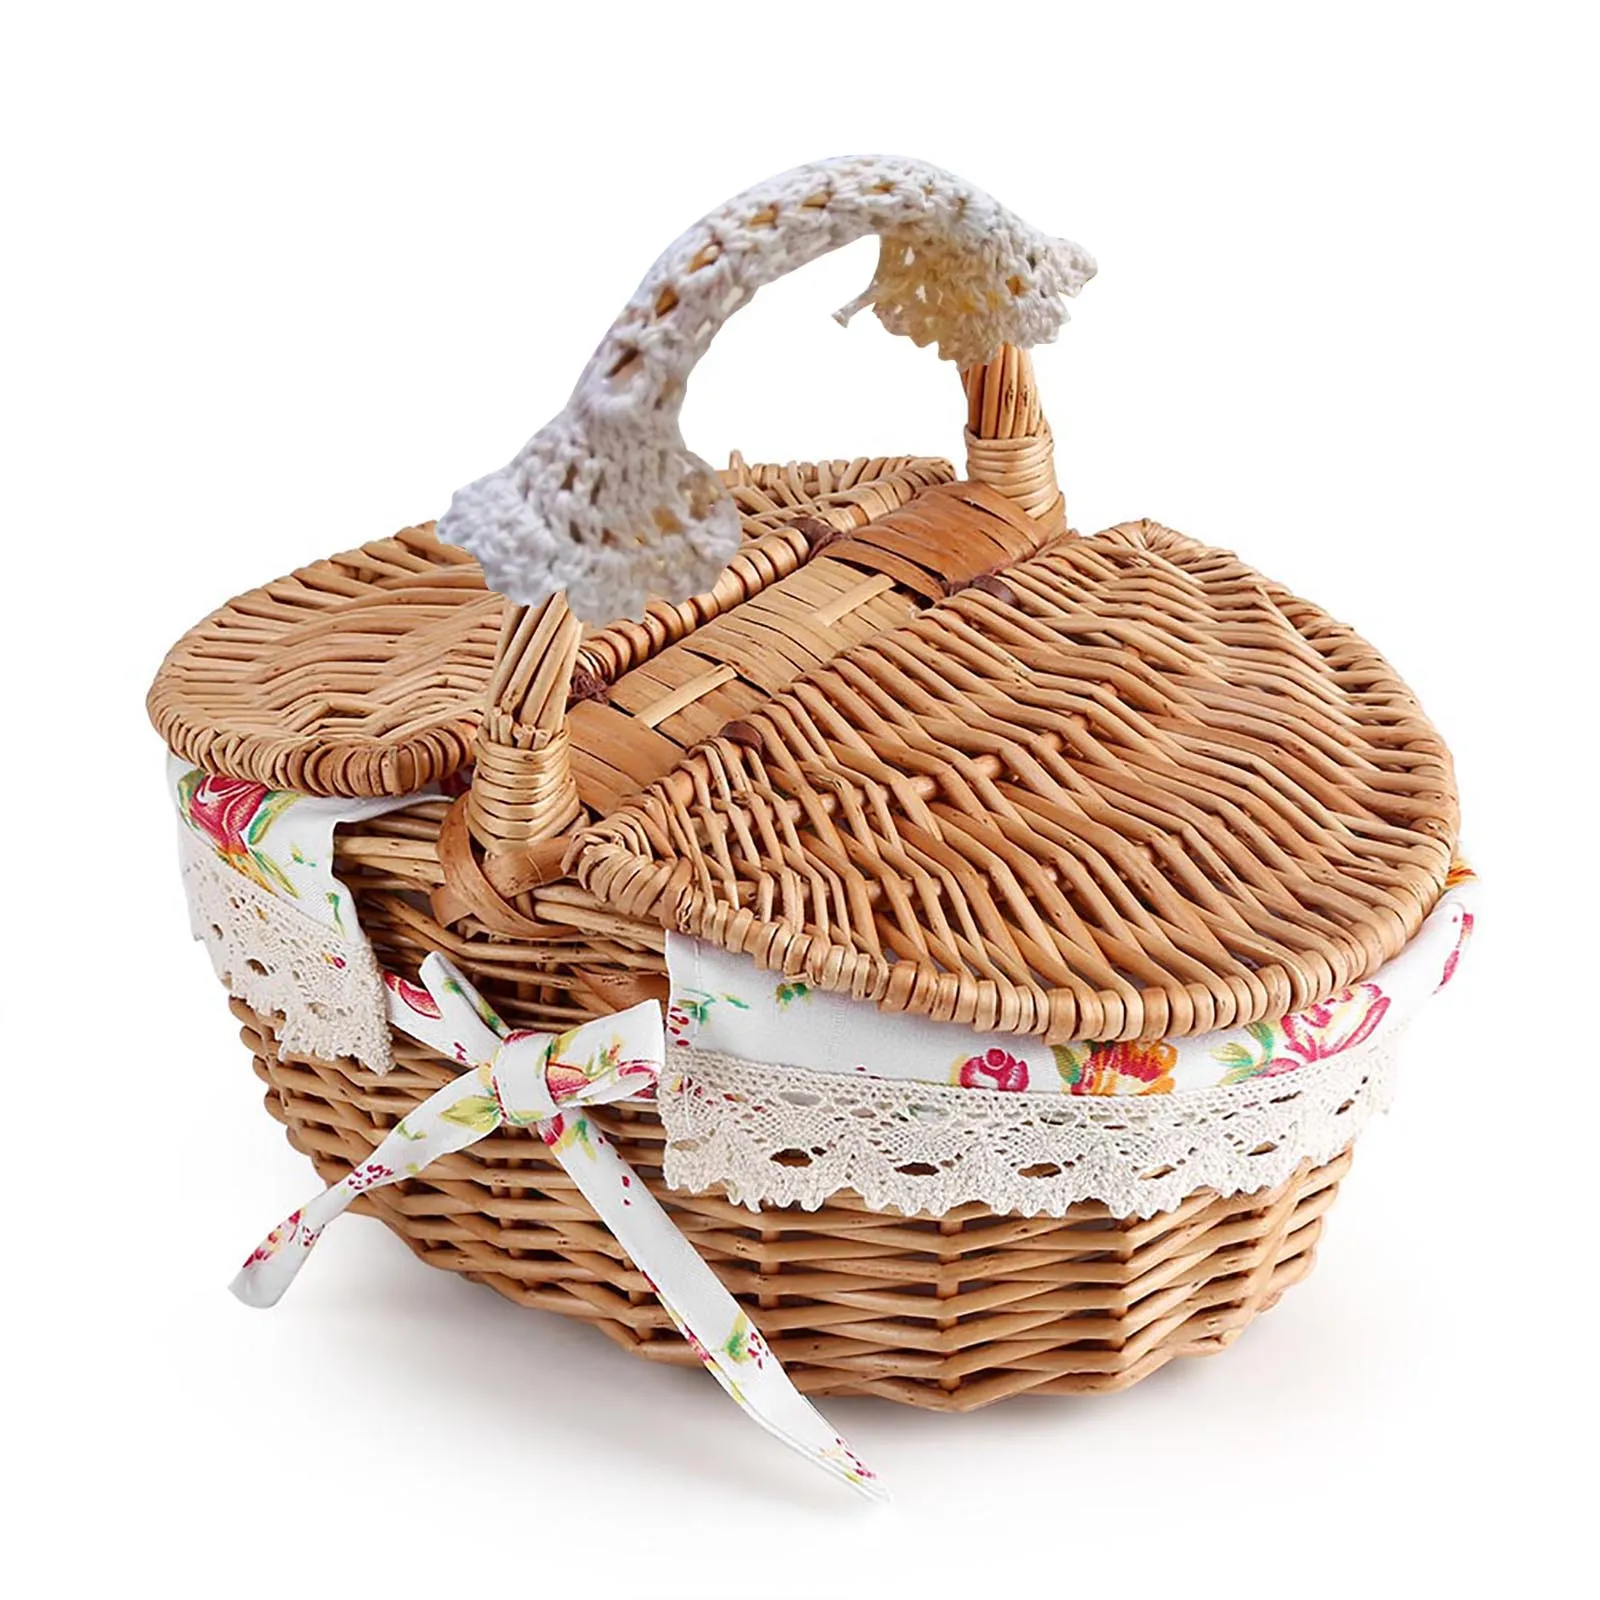 Oval Double Lidded Wicker Linen Floral Picnic Storage Basket Holiday Camping Use Home Decor Yuehuam Wicker Picnic Basket with Handle 